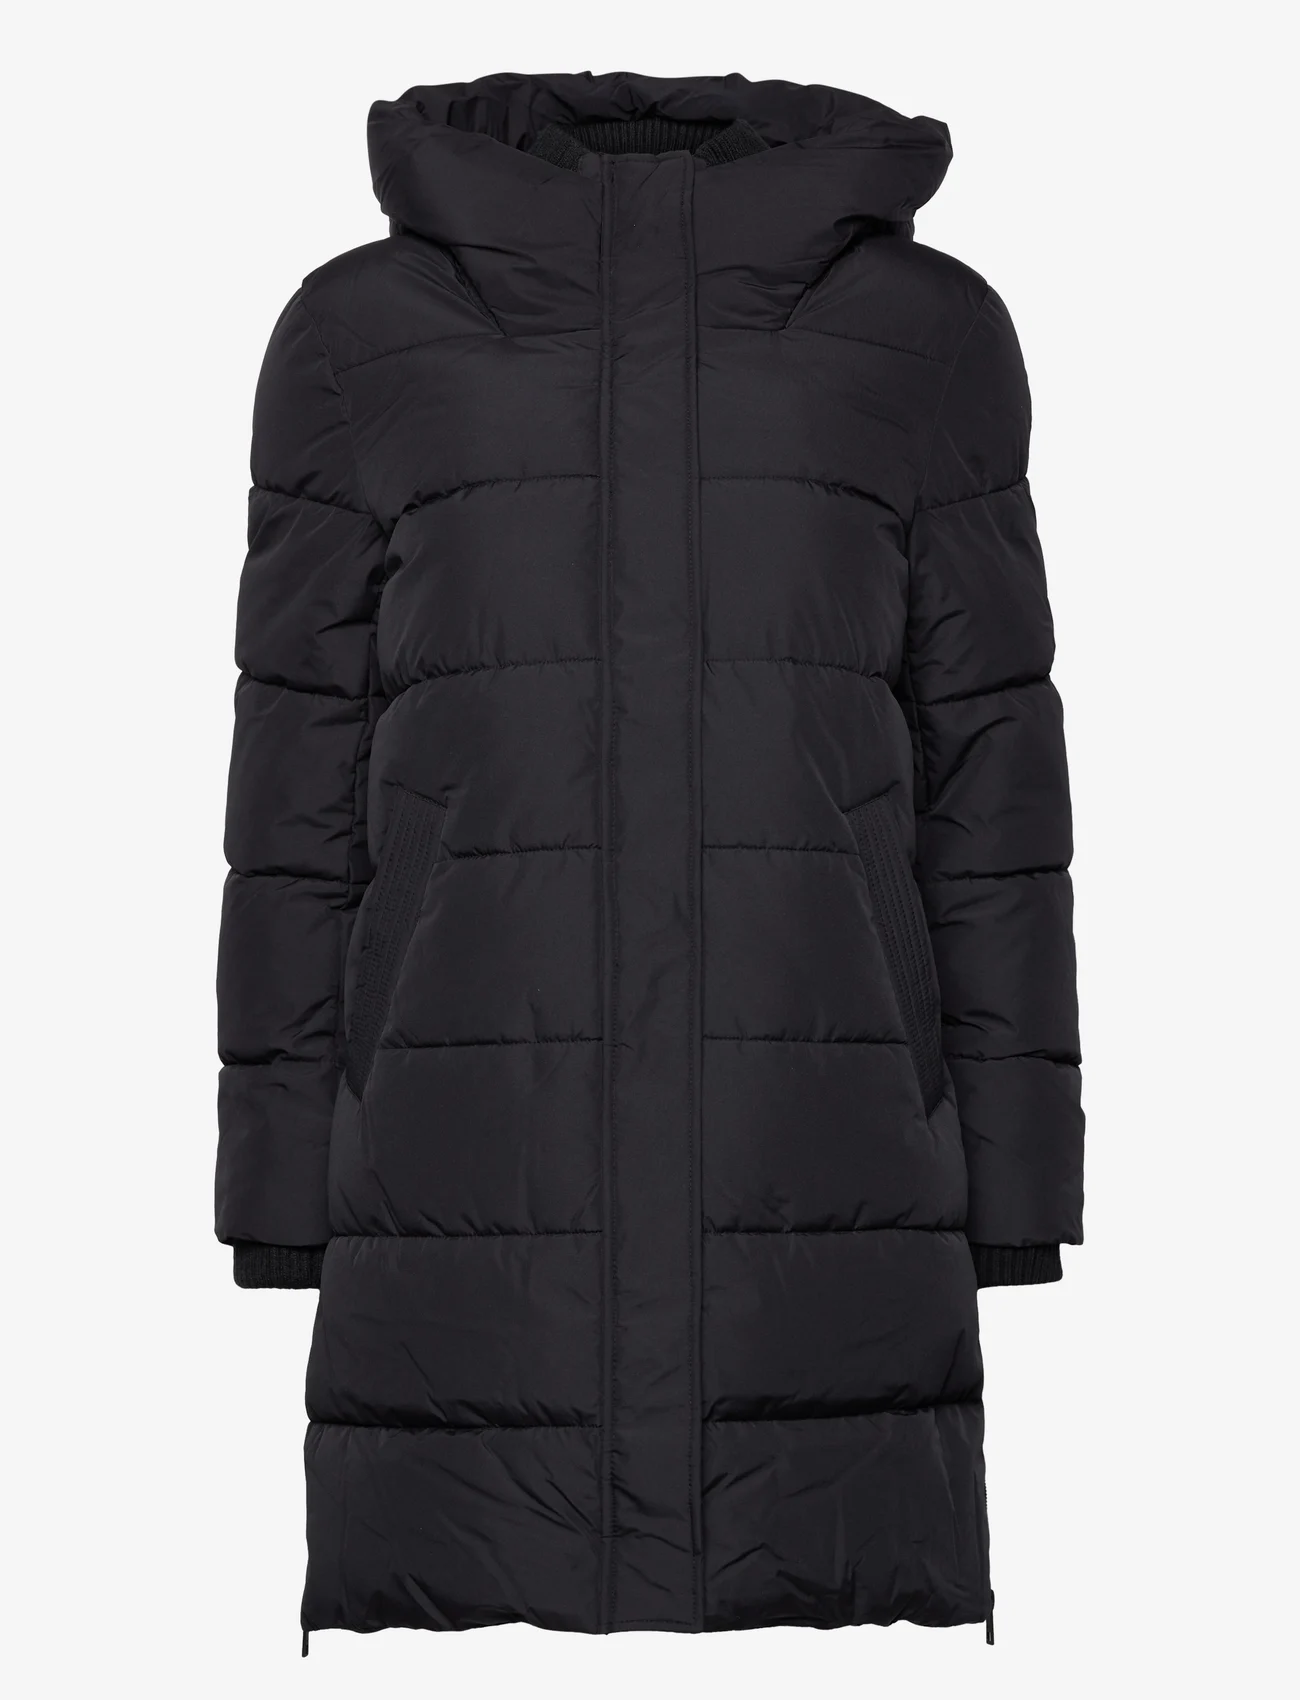 Esprit Casual - Quilted coat with rib knit details - wintermäntel - black - 0